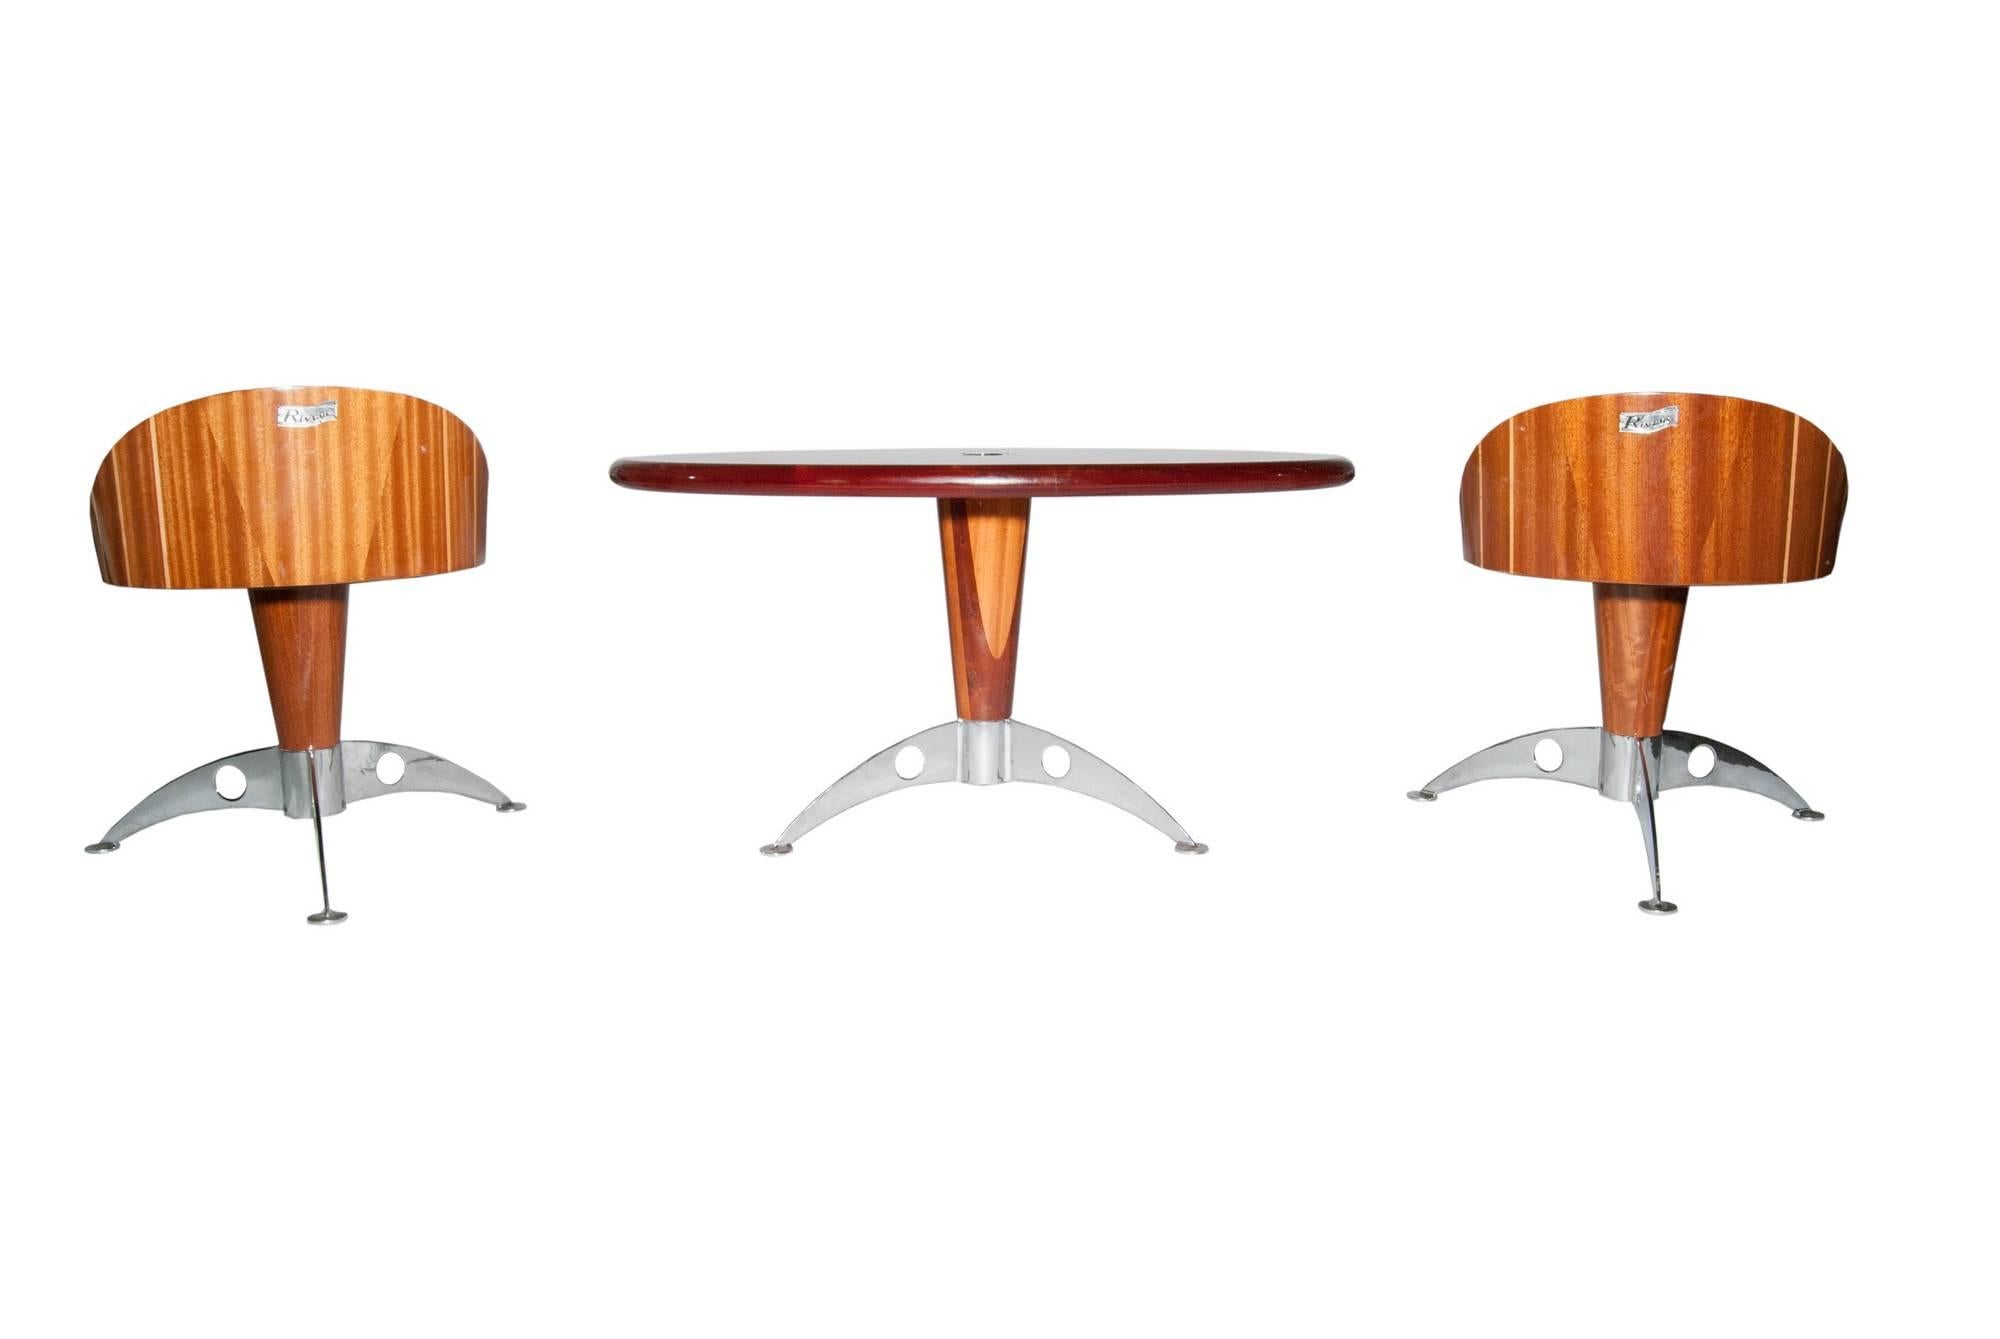 Handcrafted nautical table and two chairs designed by Triconfort for the Rivage collection. The table and chairs are highly lacquered with an inlaid design; the chairs have hand-stitched white leather seats, all on cast aluminum bases. Measures: The